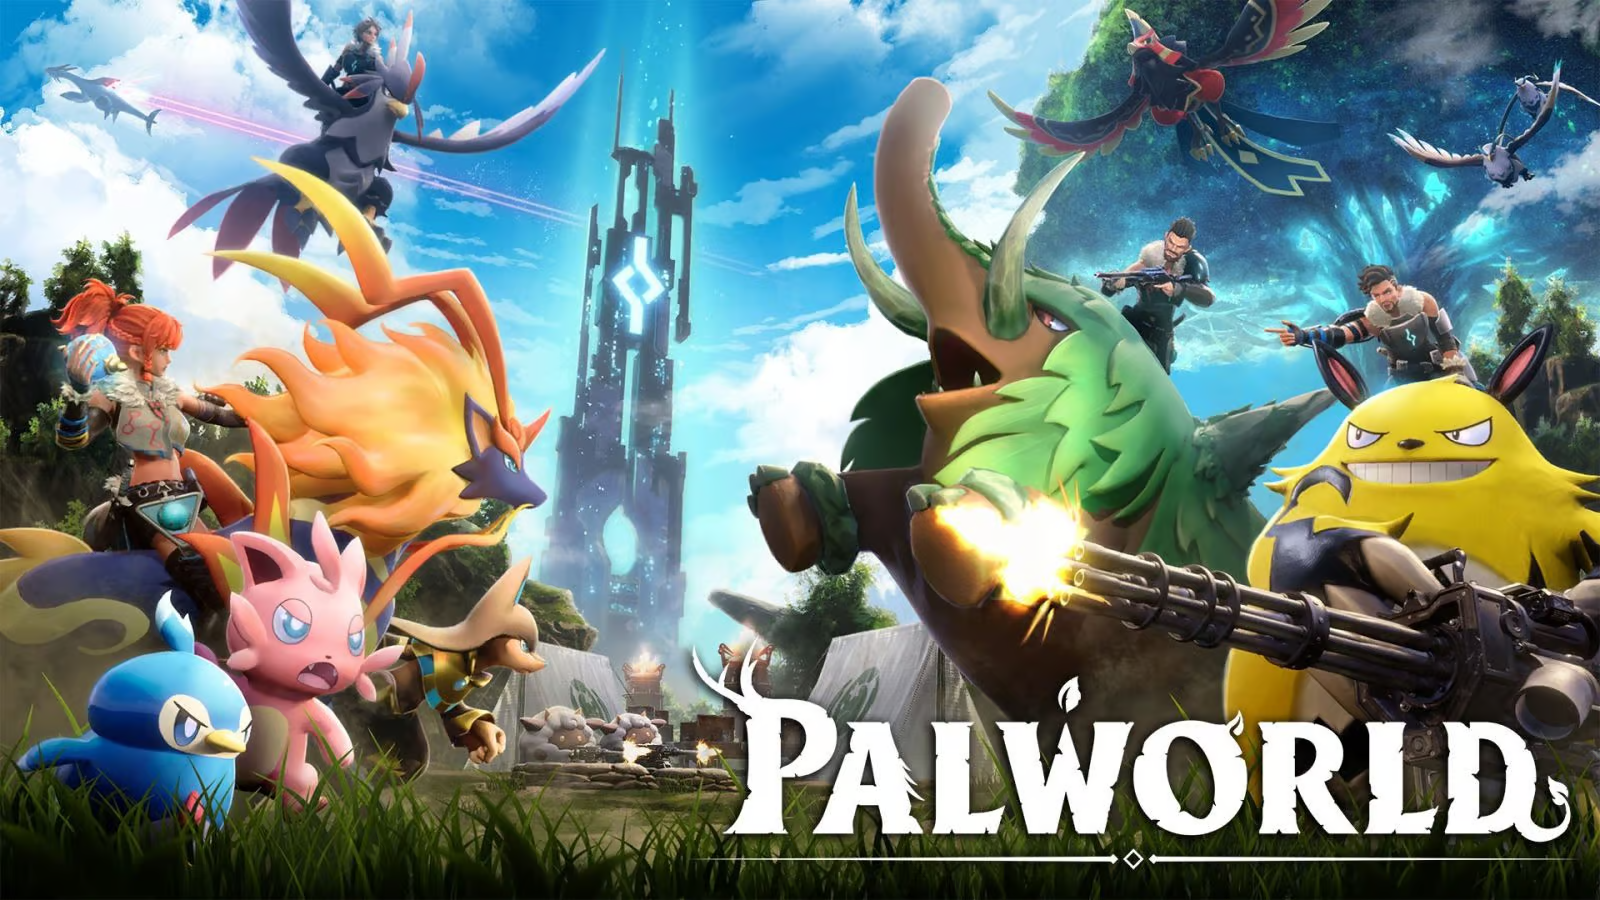 Palworld developers assure that their game is not a scam like The Day Before